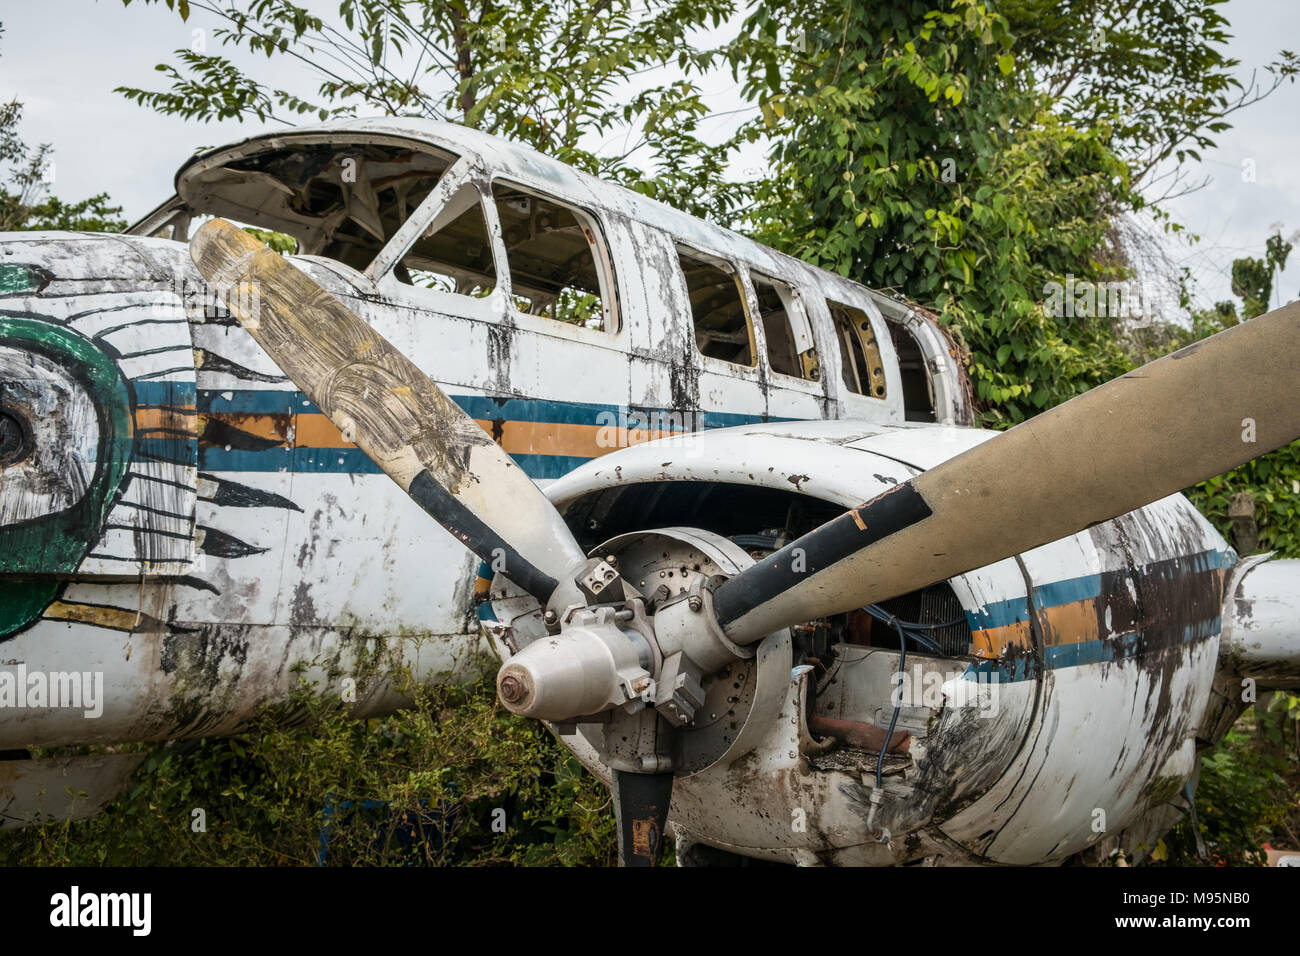 airplane wreckage in jungle - old propeller aircraft in forest - Stock Photo